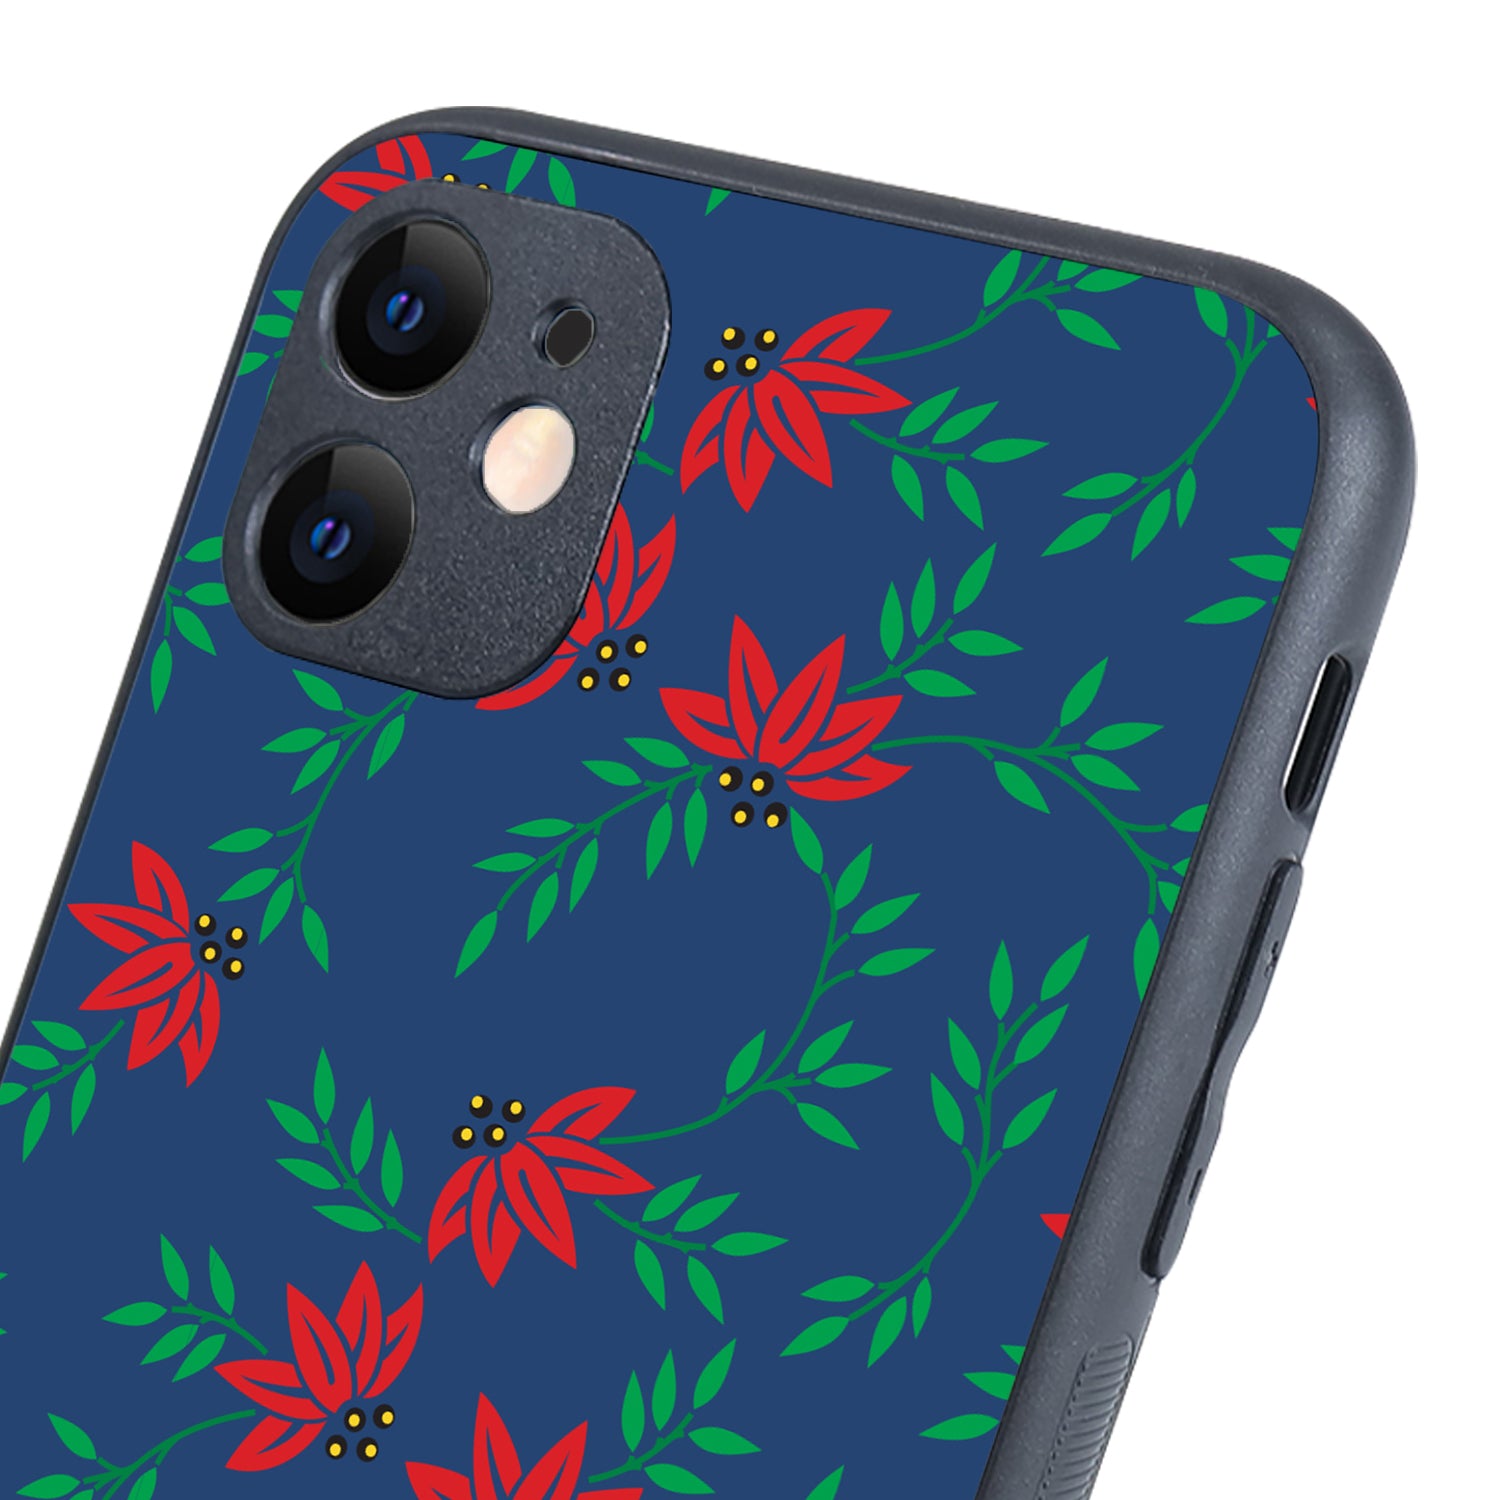 Red Green Leaves Floral iPhone 11 Case